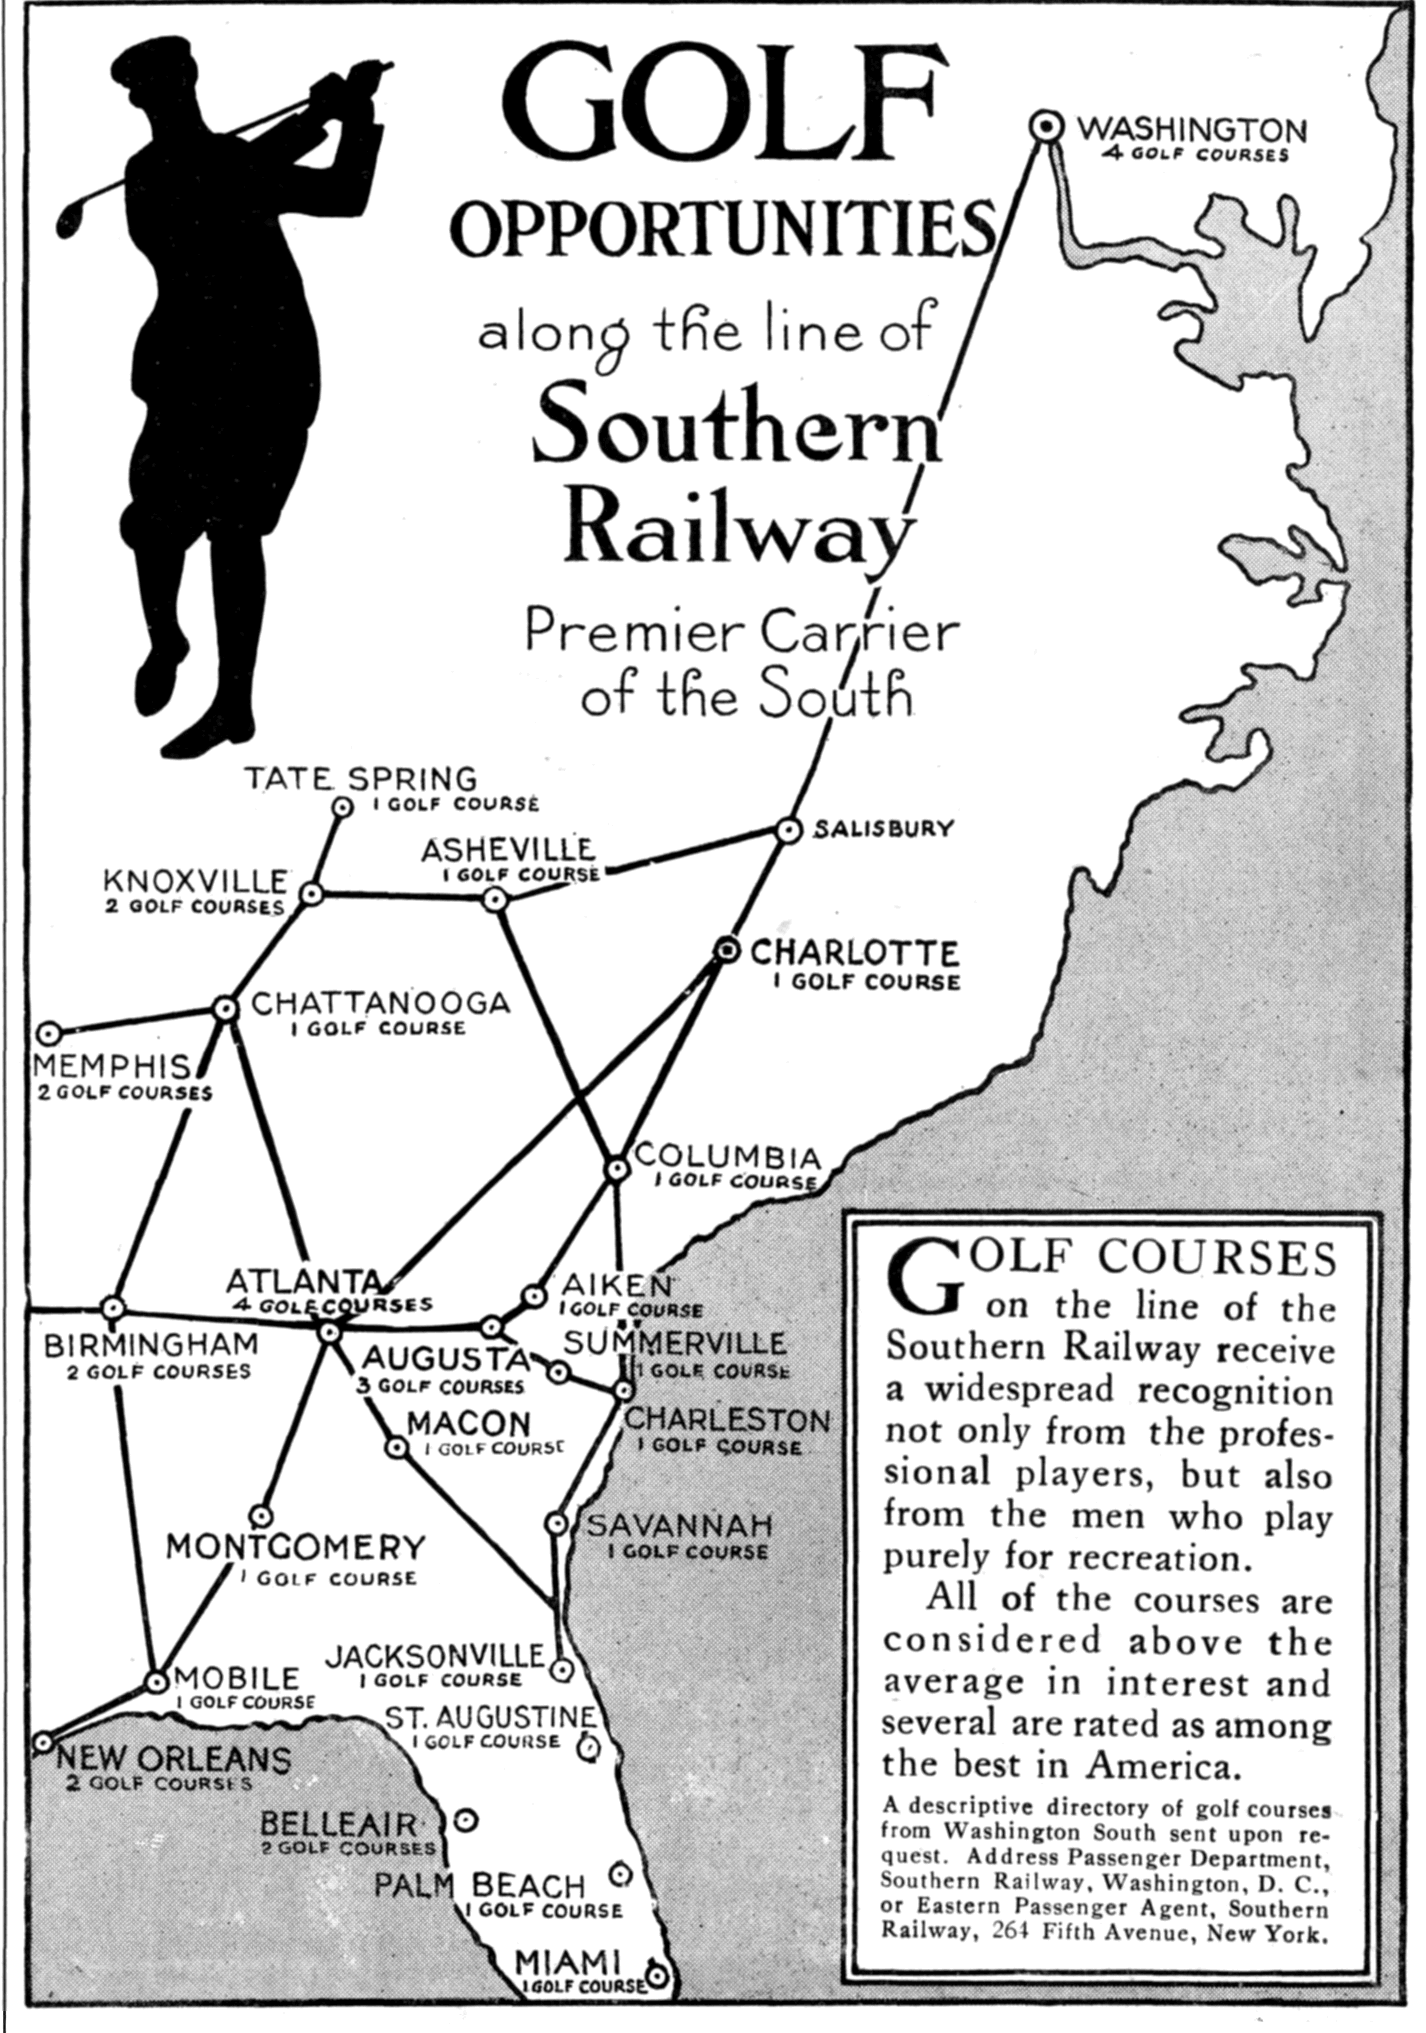 A vitnage ad for the golf course along the Southern Railway.